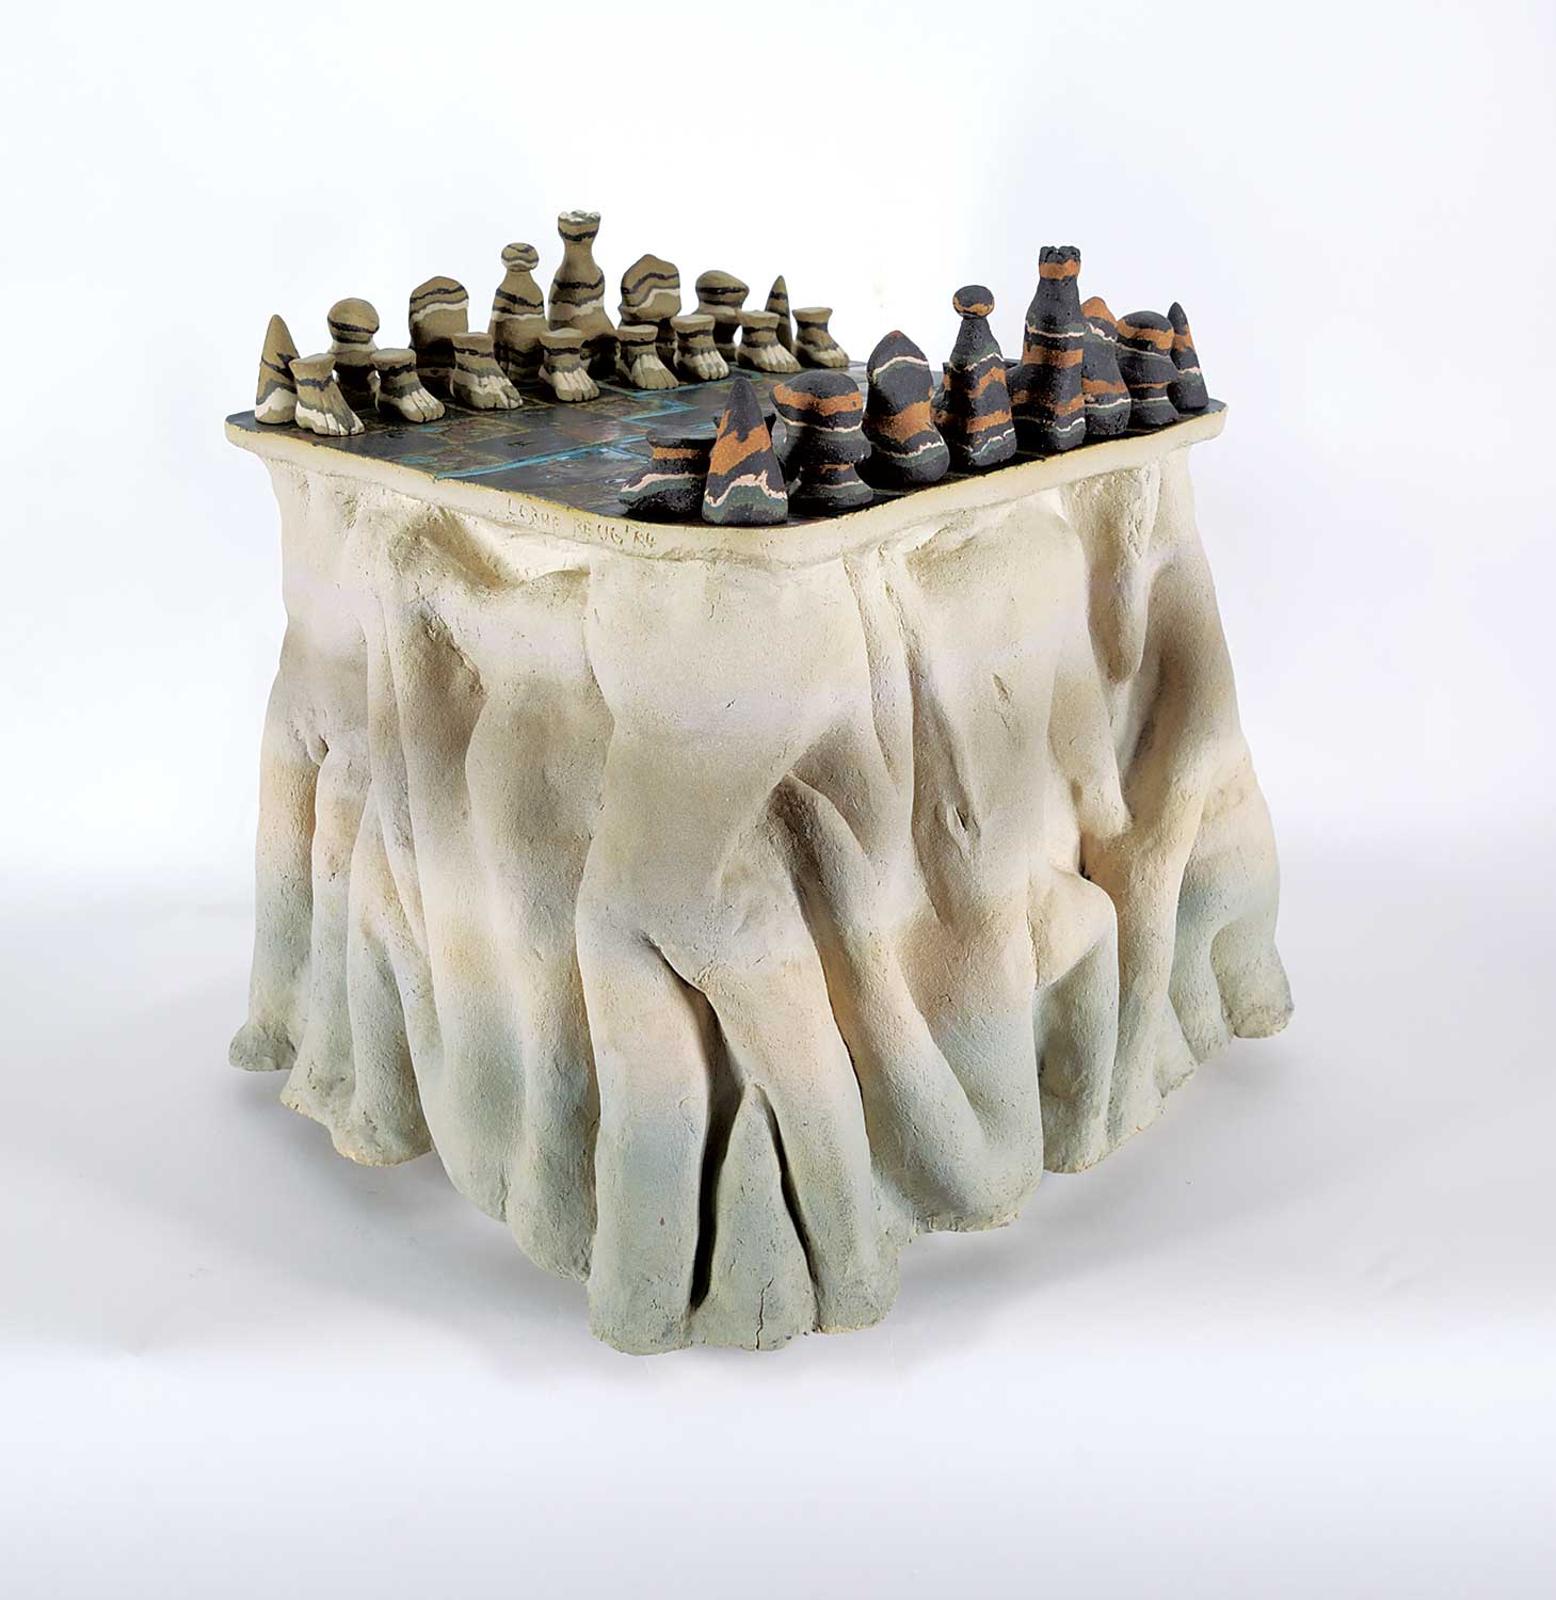 Lorne Beug (1948) - Untitled - Human Forms Chess Set